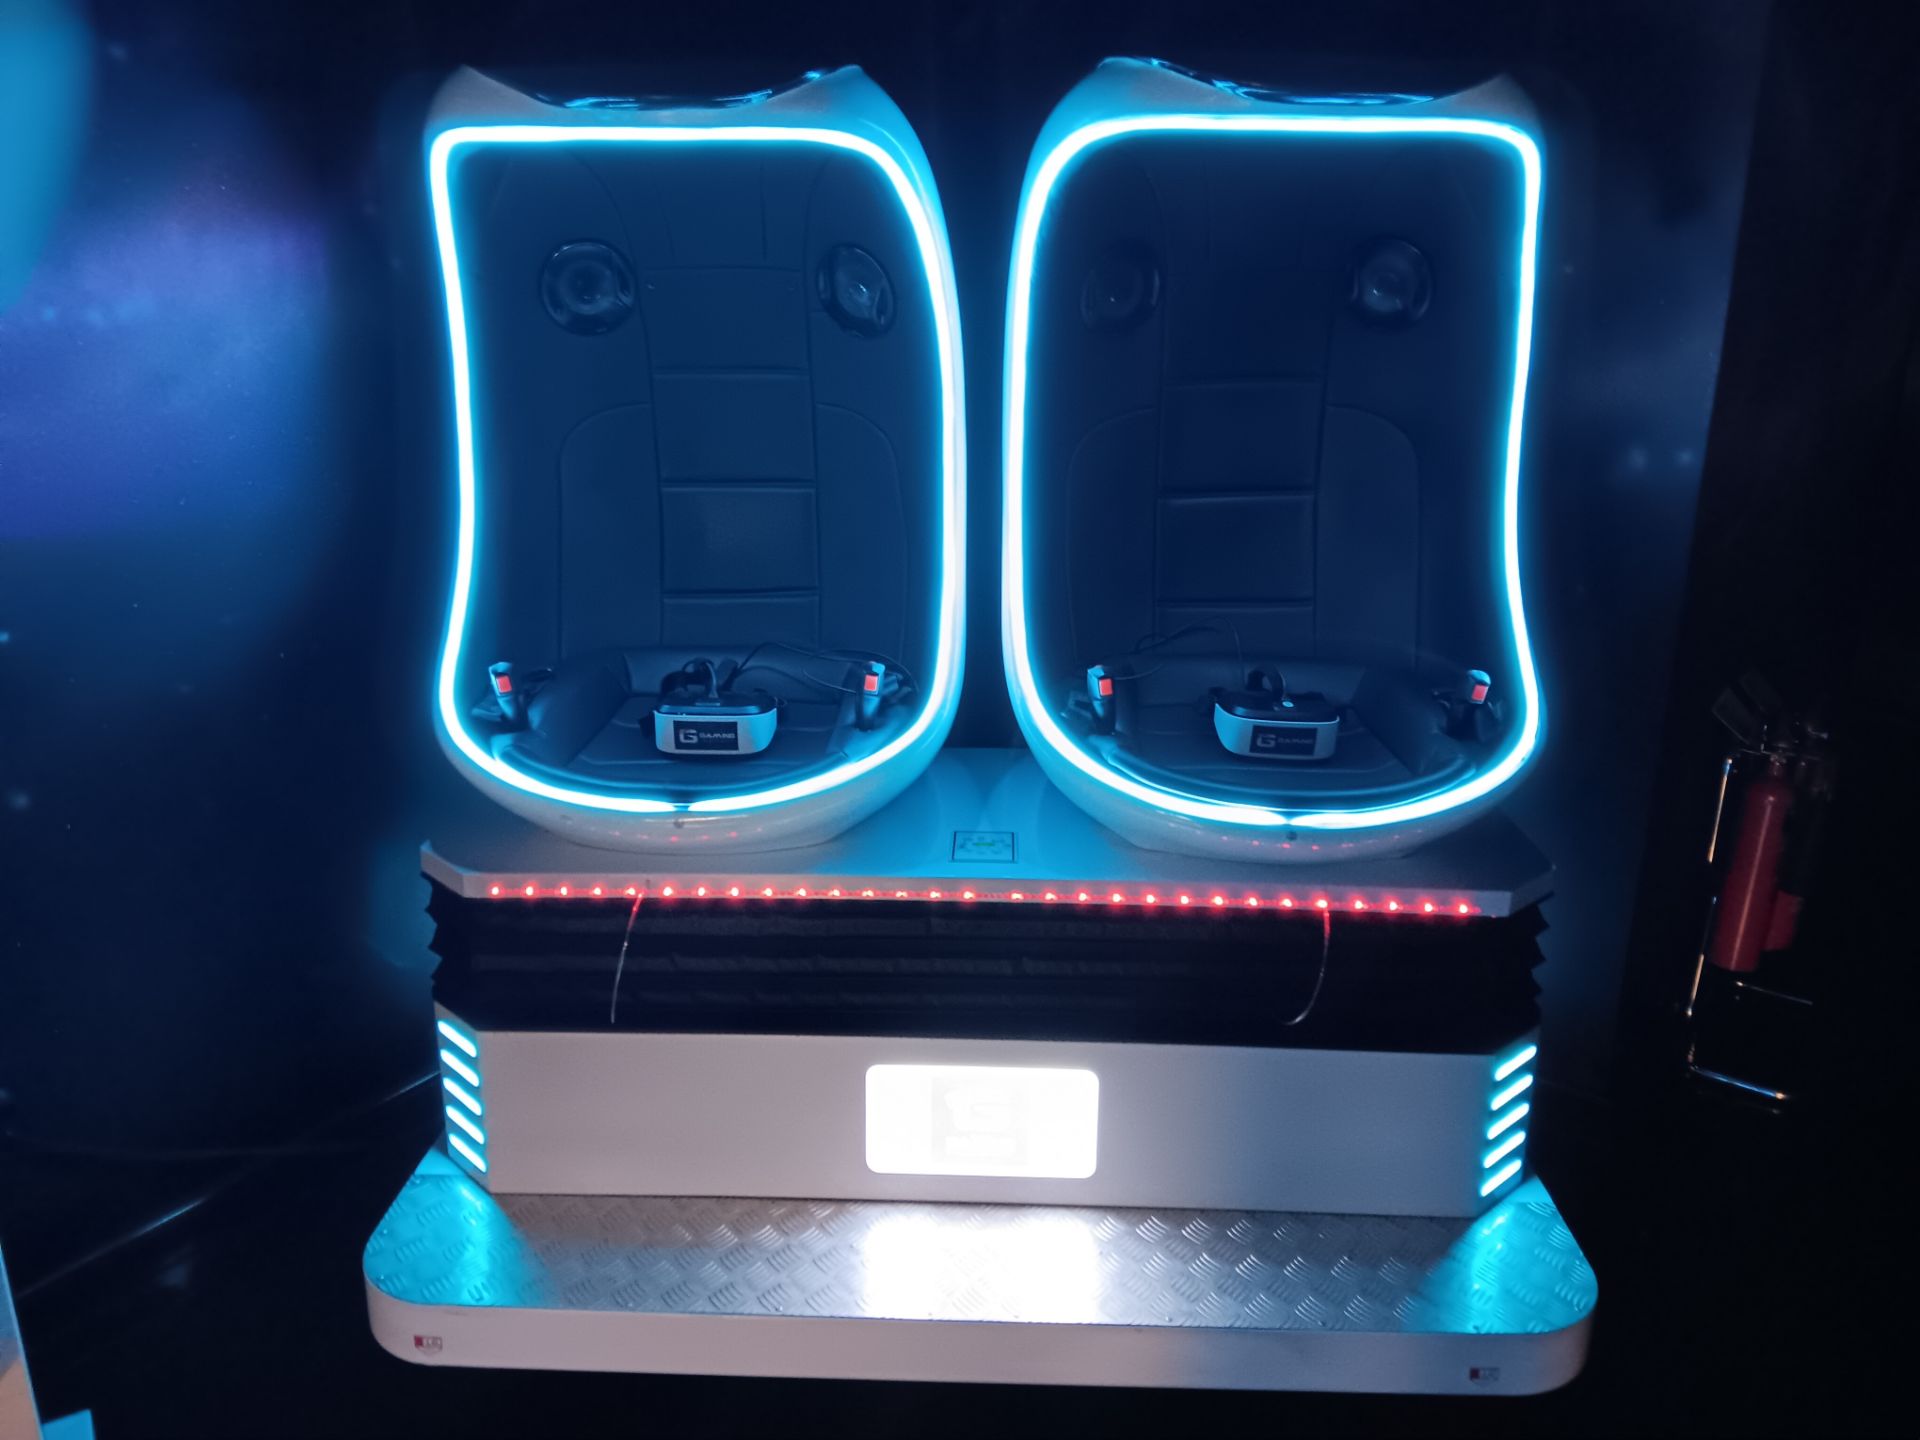 Movie Power 2-Person Twin Pod VR Motion Ride Cinema/Games Simulator – Cost New £9,600 – Buyer to - Image 2 of 4